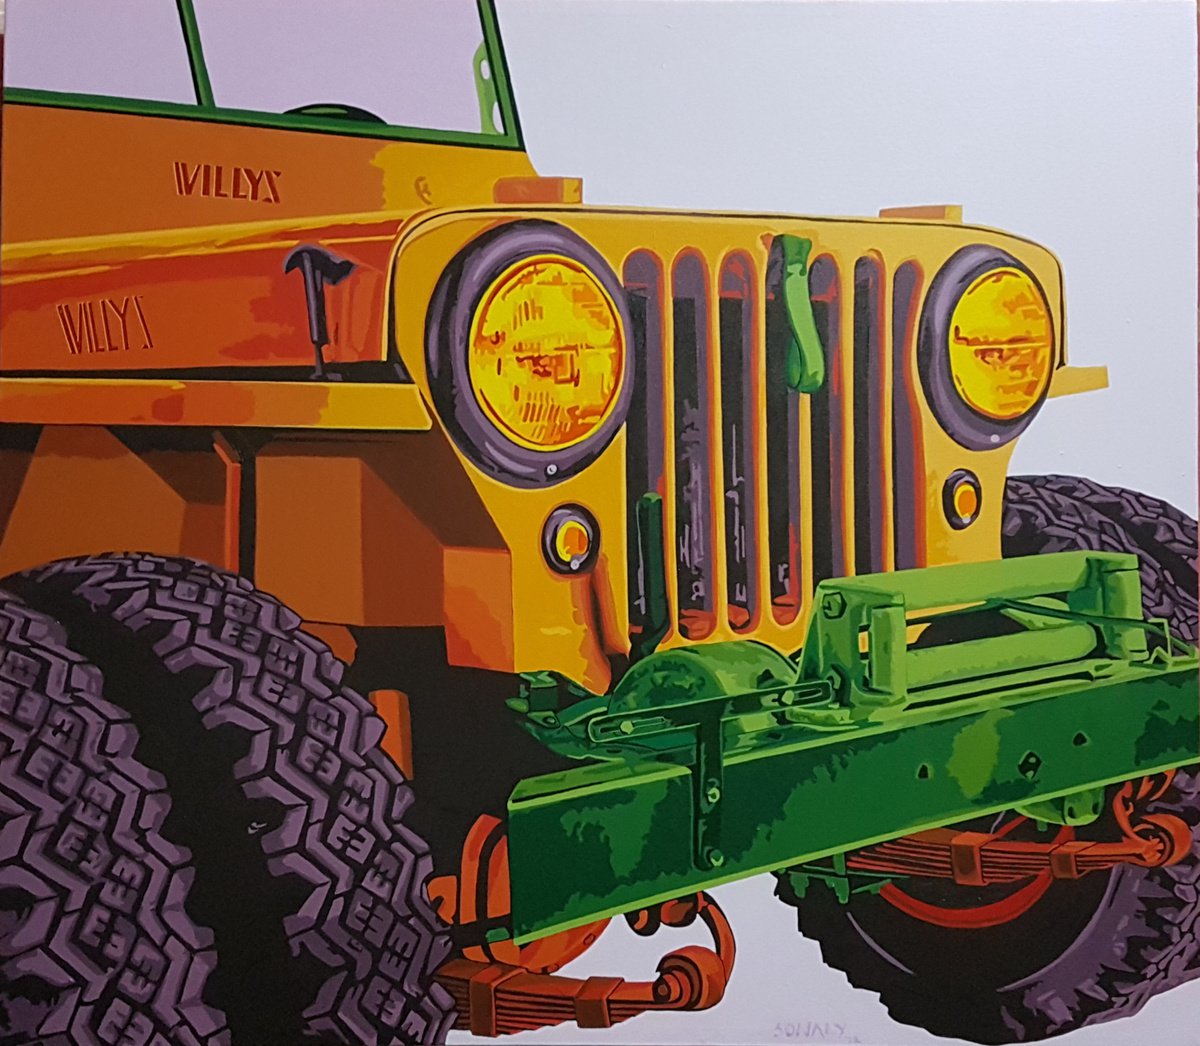 Automobiles - Classic meets Pop - Willeys Jeep by Sonaly Gandhi